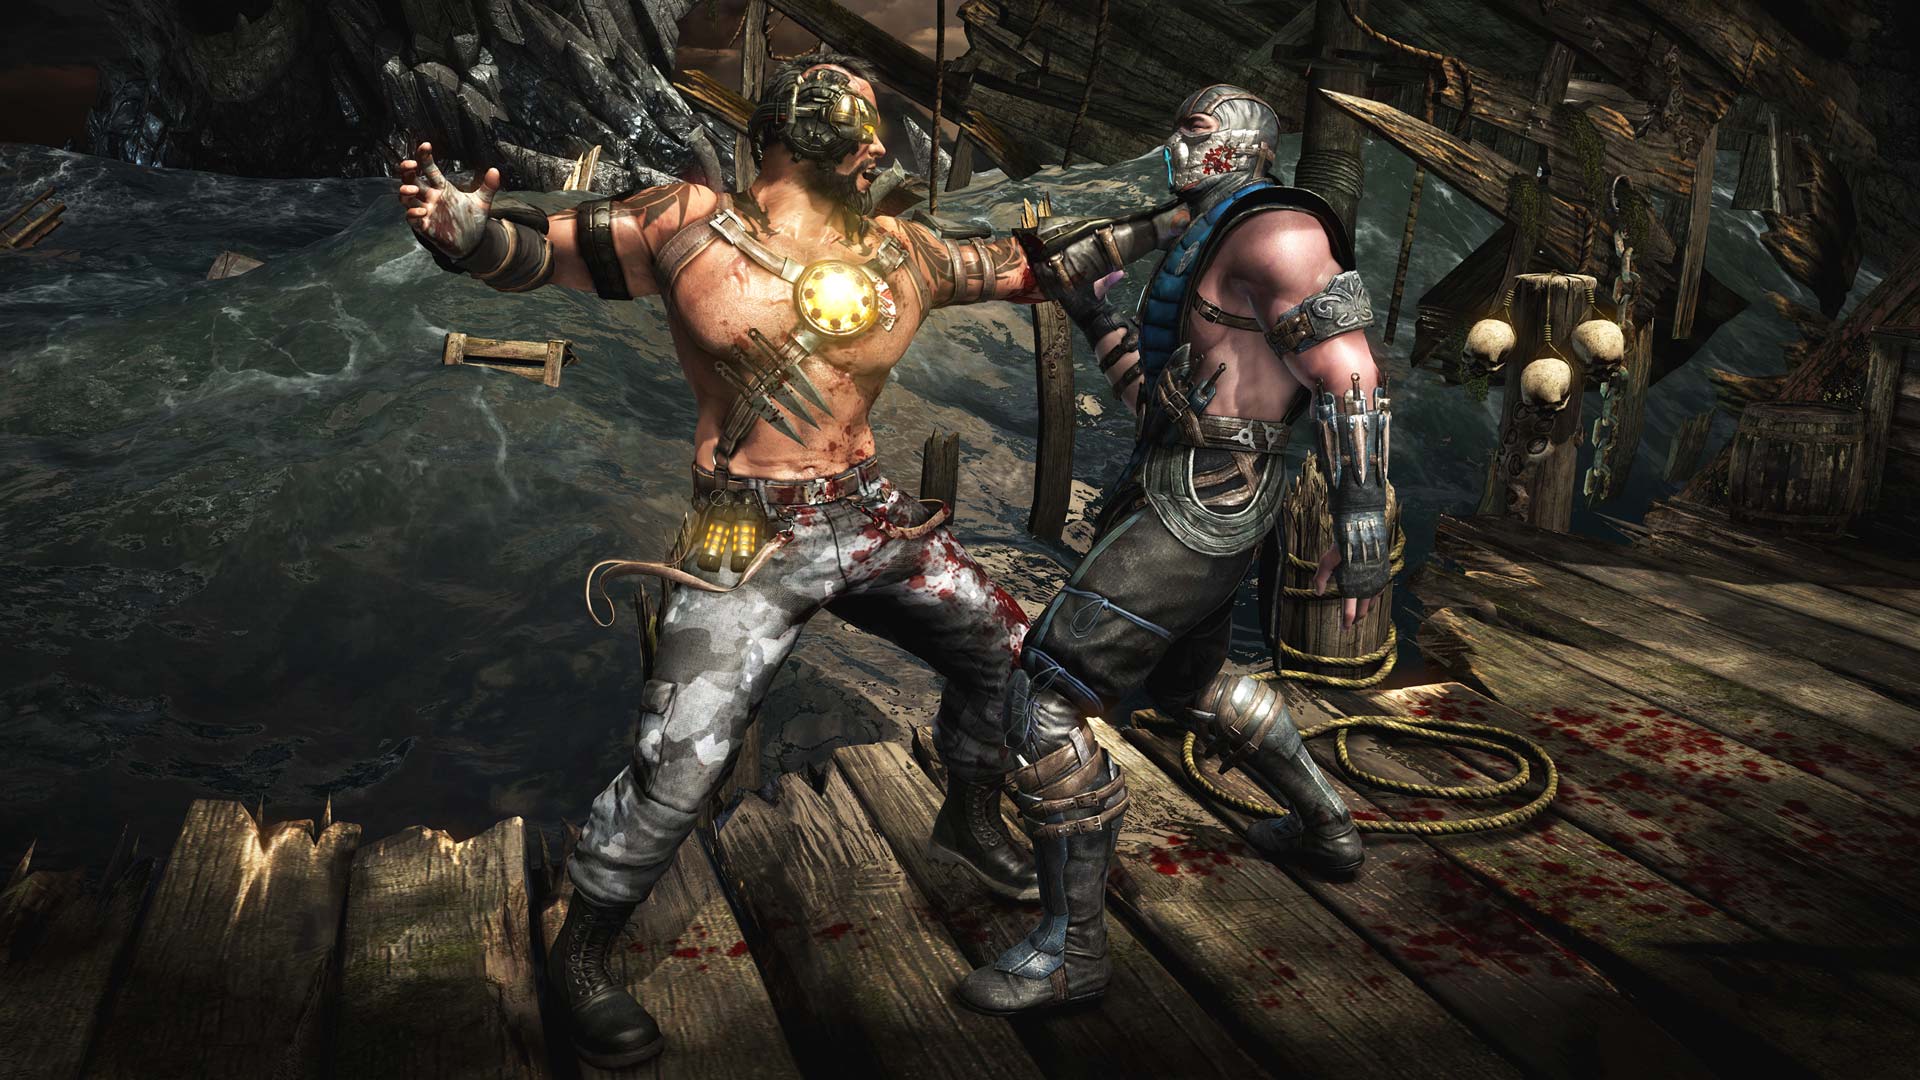 Mortal Kombat 12 Gets Announced During Warner Bros. Discovery's